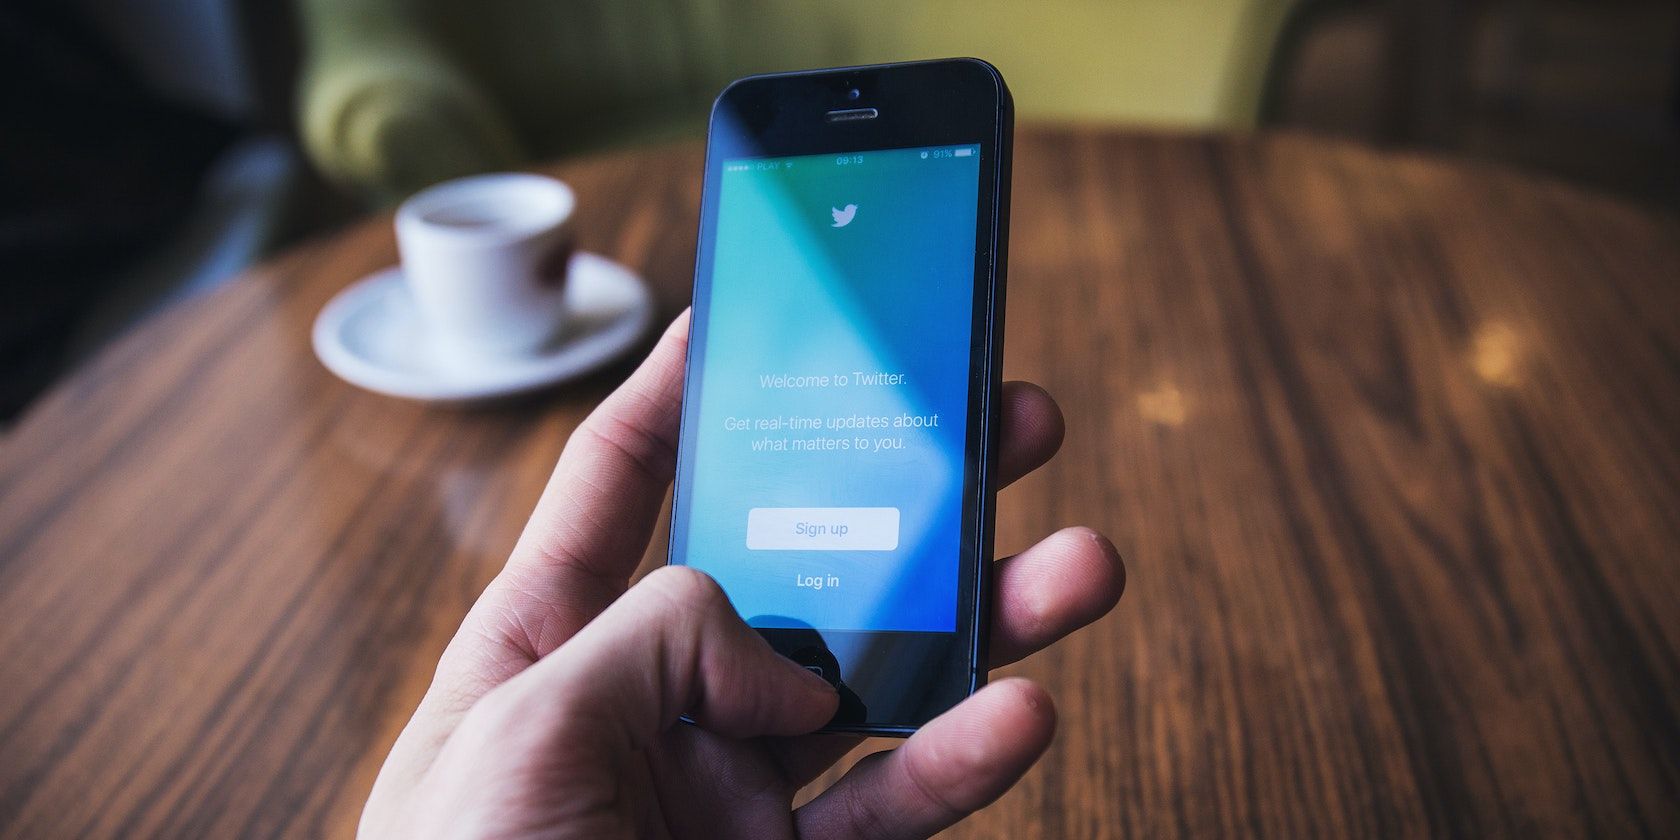 A hand holding a mobile phone which shows the twitter welcome screen